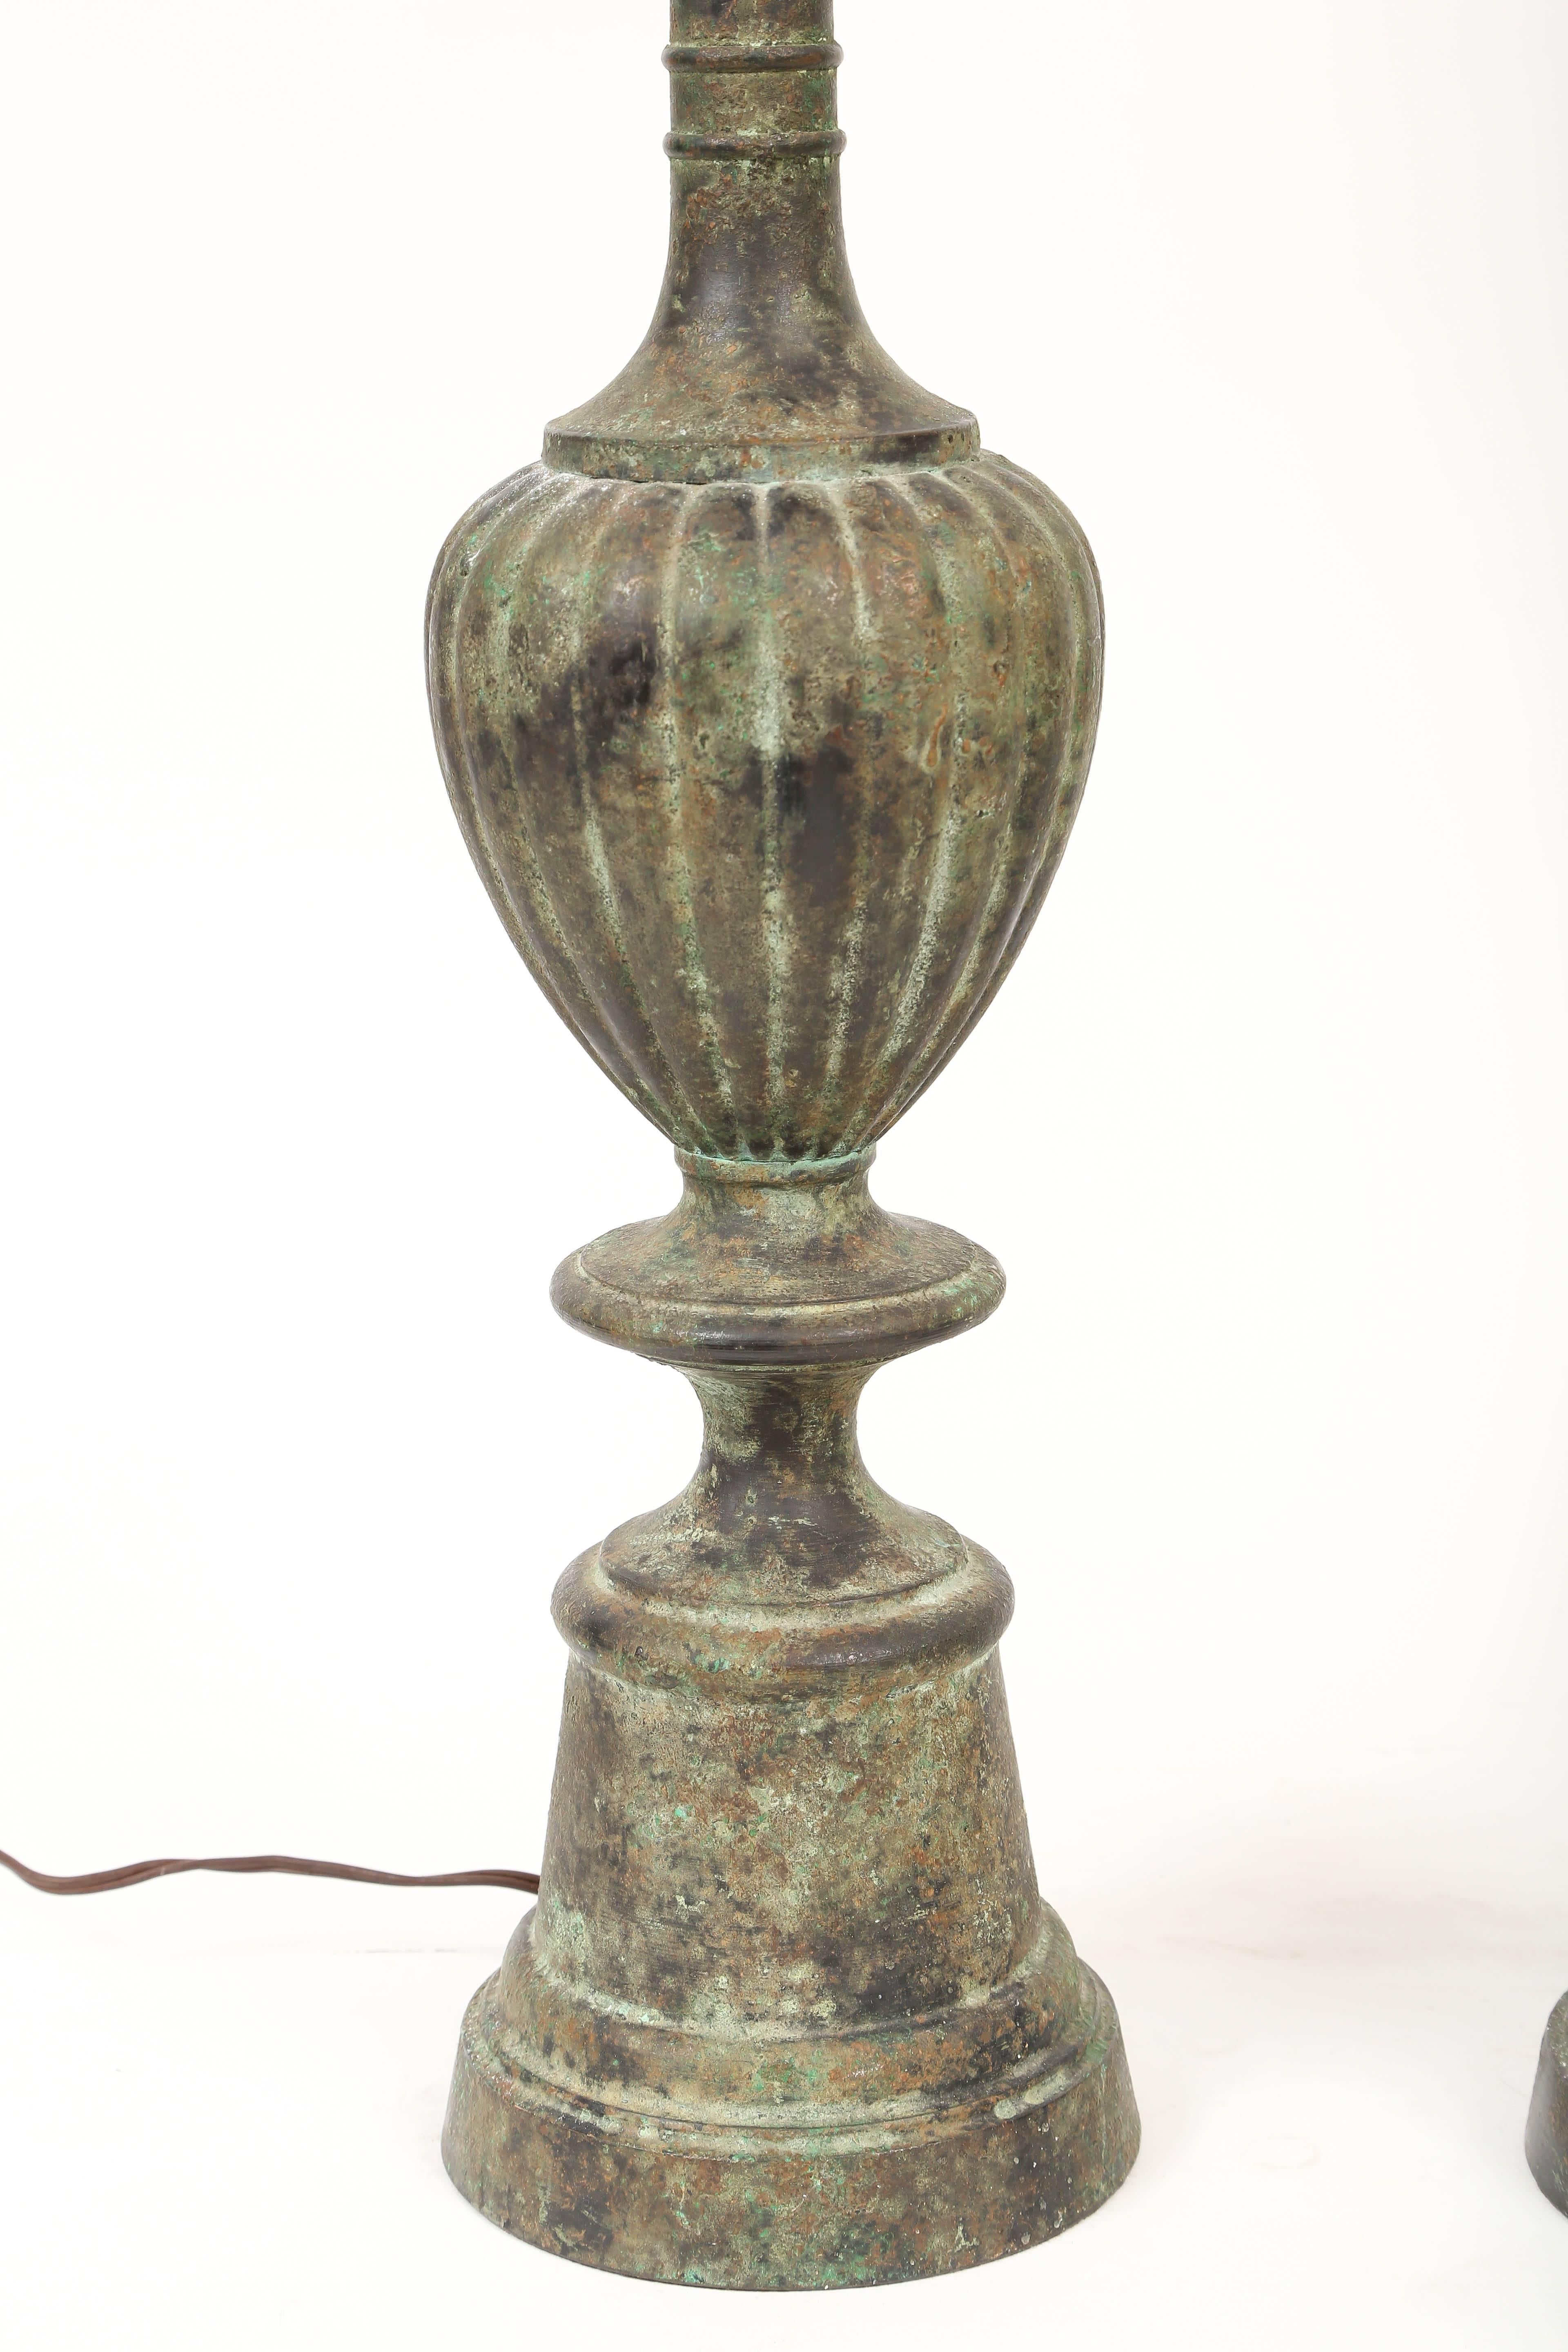 Highly decorative pair of Pompeii style verdigris bronze lamps. Heavy cast with complex pagination.